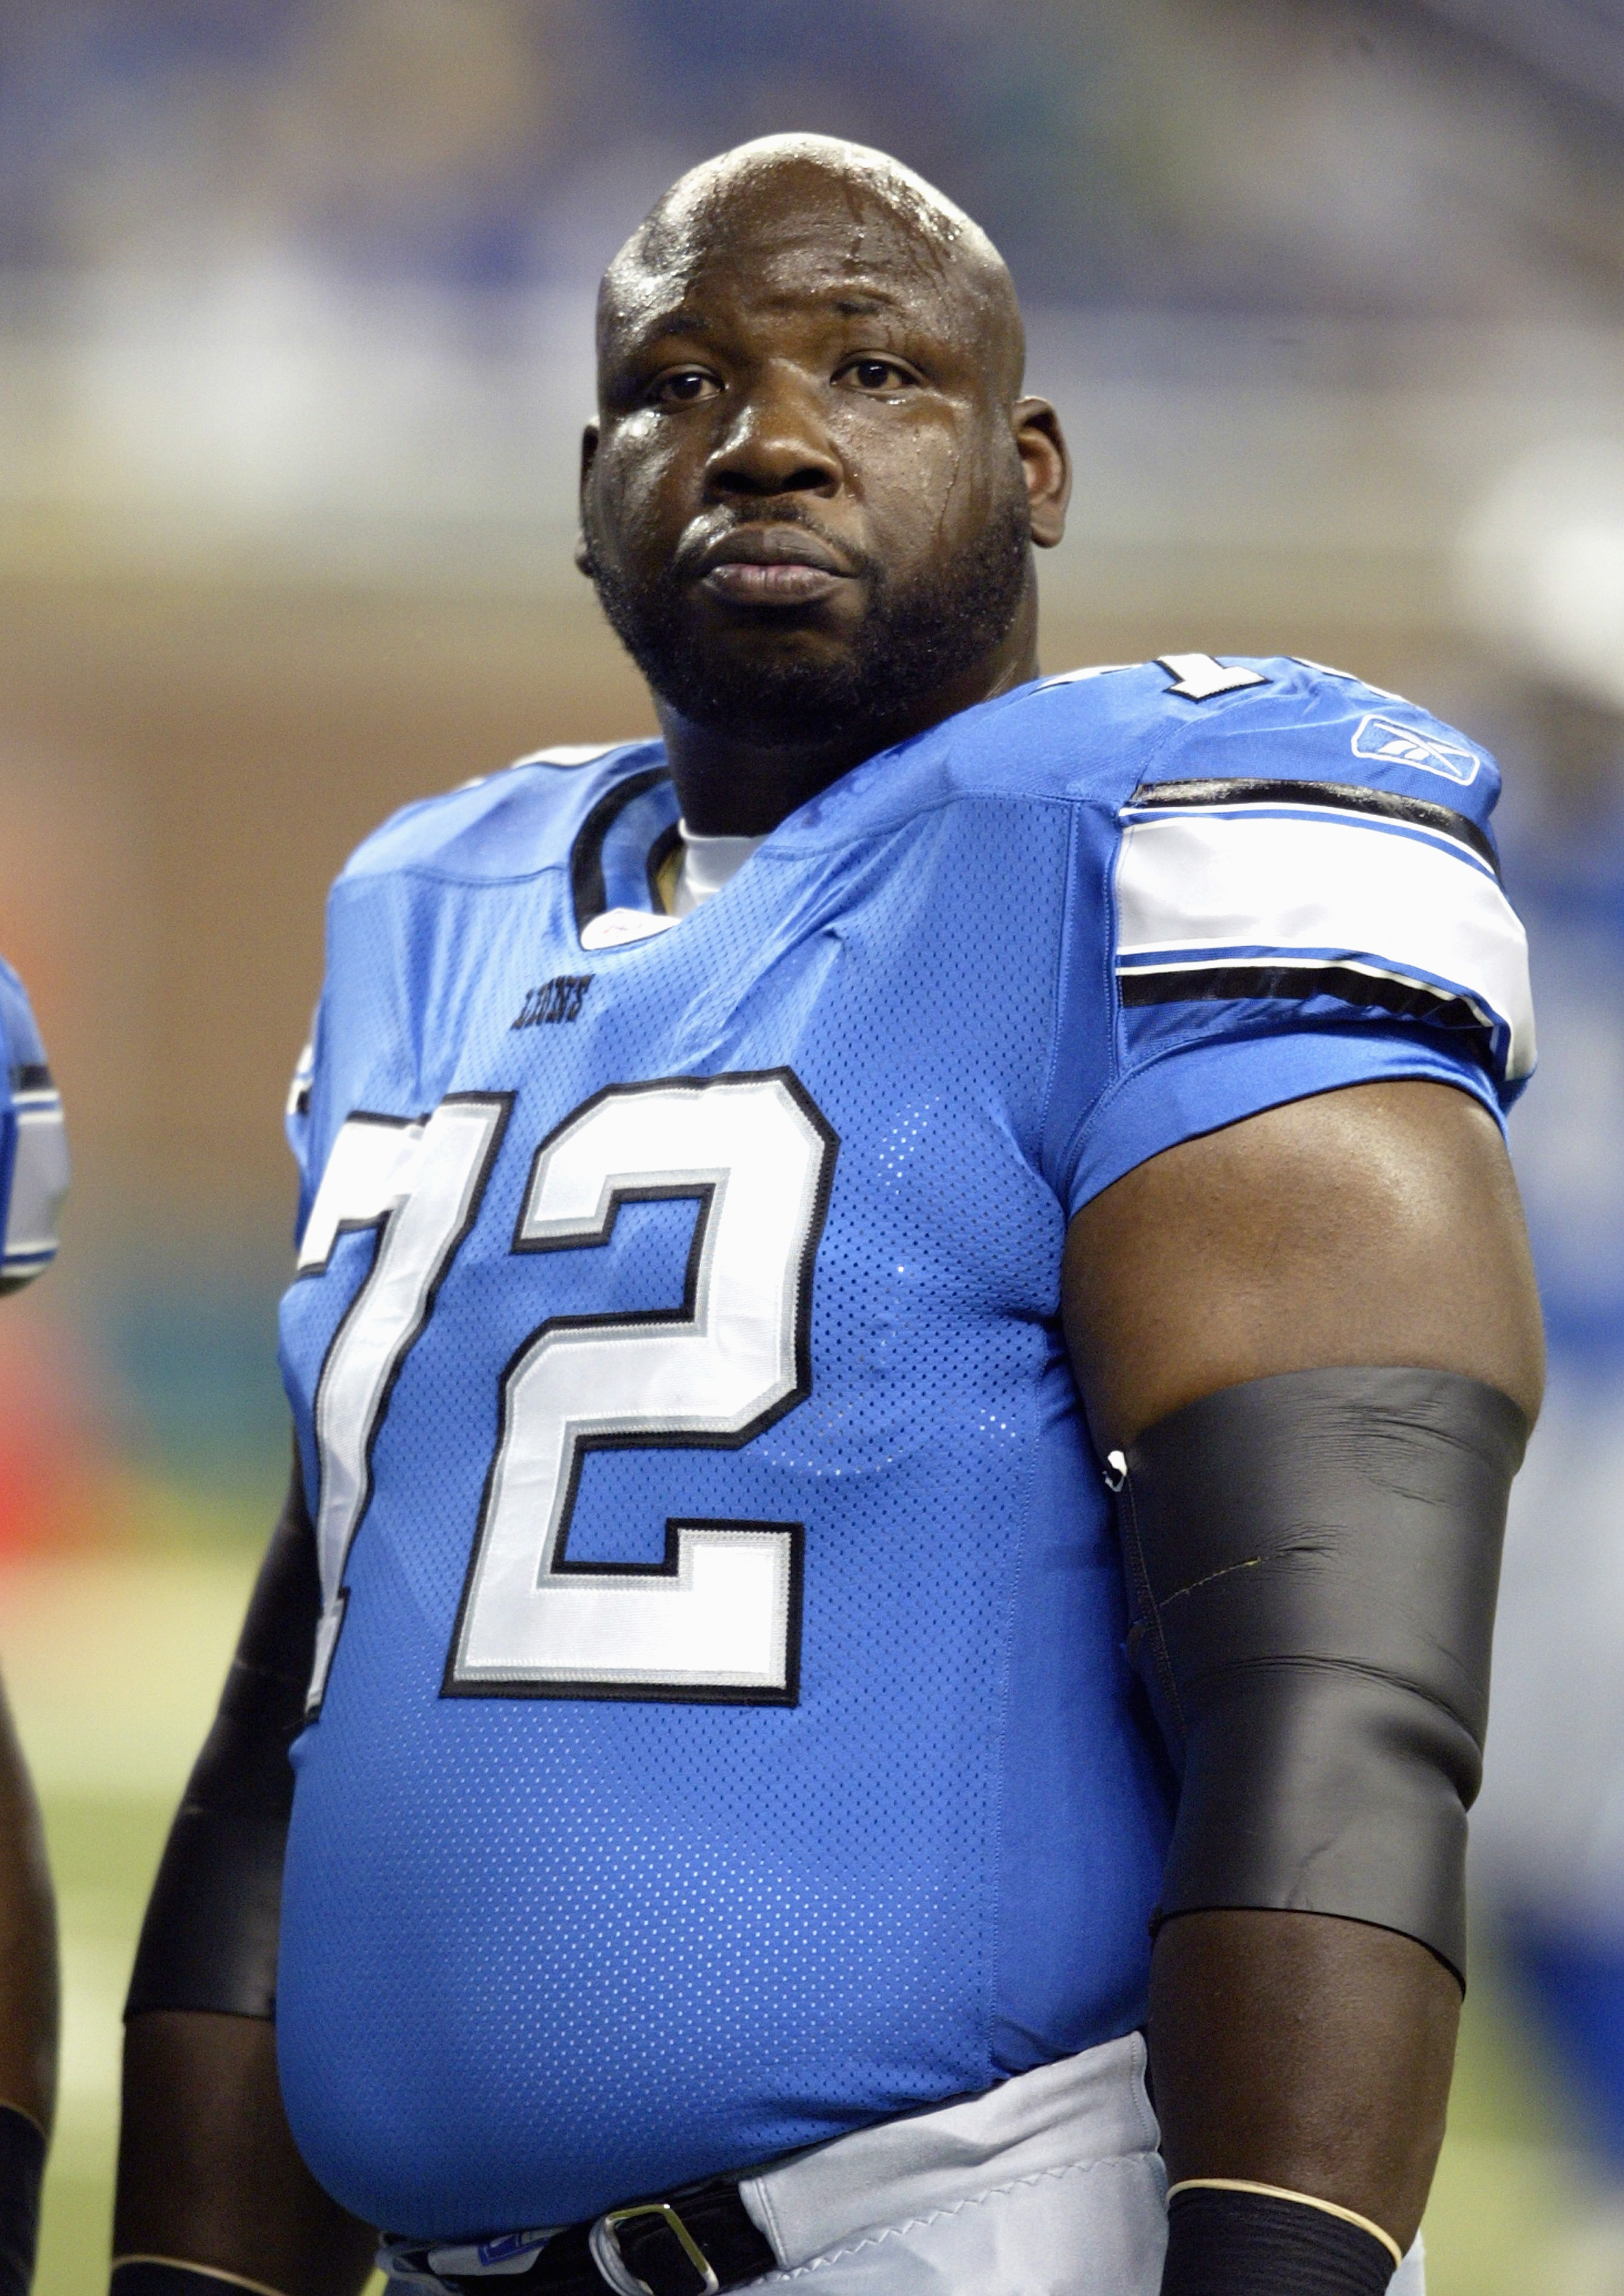 DETROIT- AUGUST 20:  Defensive tackle Dan Wilkinson #72 of the Detroit Lions stands with his helmet off during the preseason game against the Cleveland Browns on August 20, 2005 at Ford Field in Detroit, Michigan. The Browns won 21-13. (photo by Tom Pidge